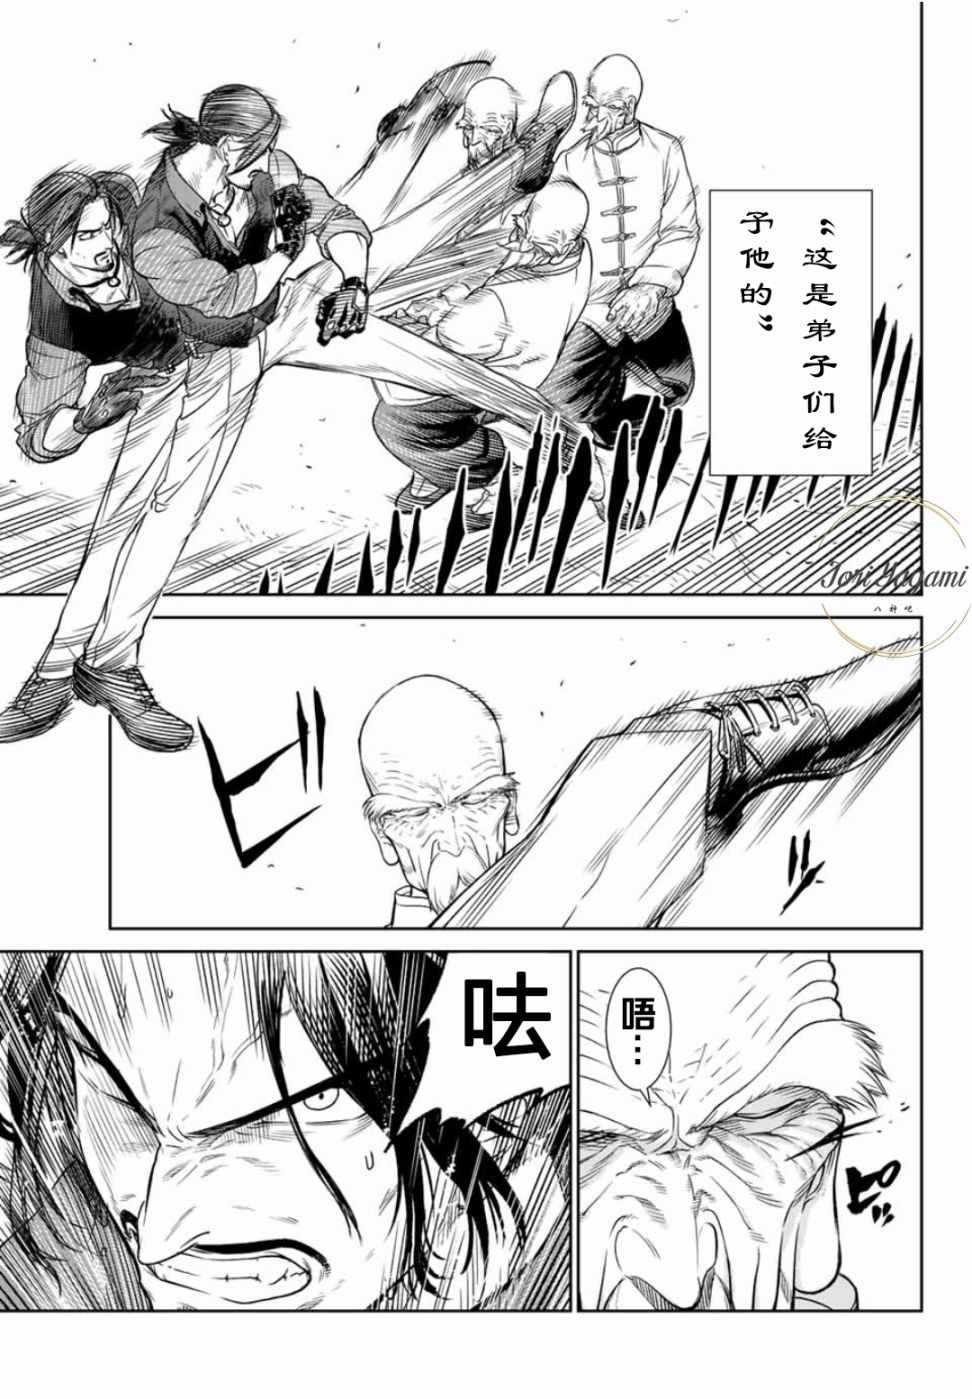 《THE KING OF FIGHTERS～A NEW BEGINNING～》漫画 ANEWBEGINNING 025话